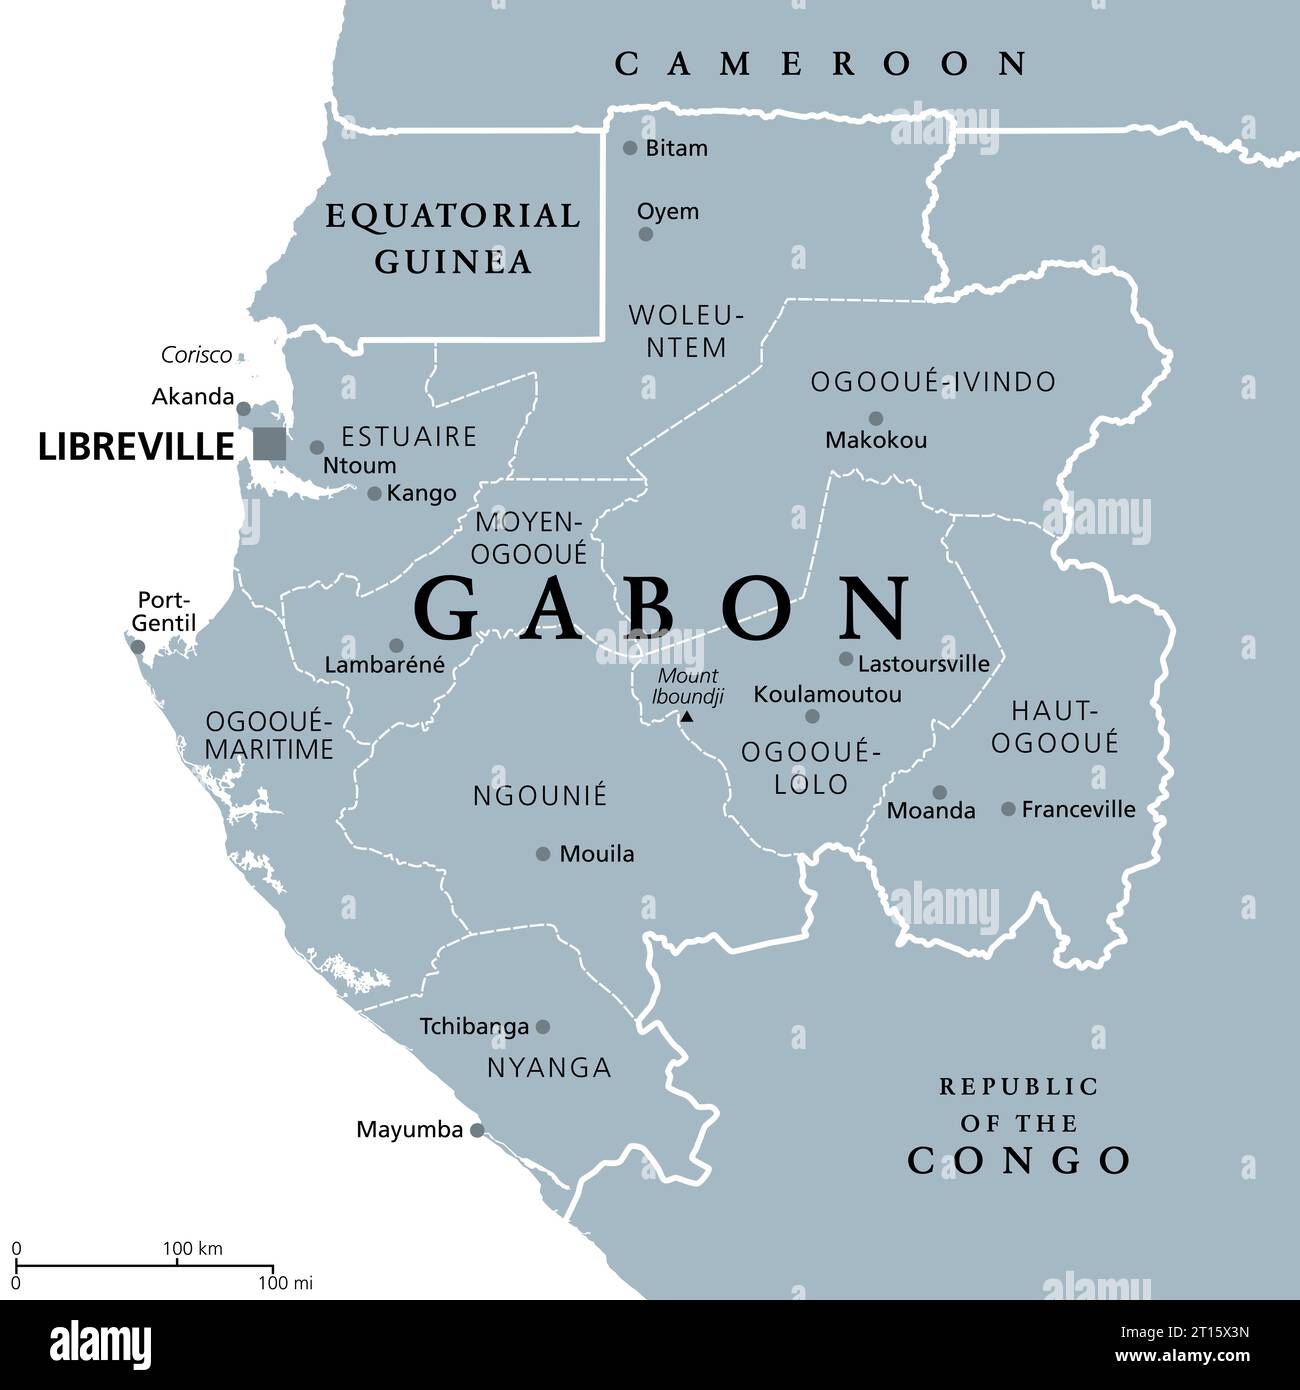 Gabon, gray political map with provinces. Gabonese Republic, with capital Libreville. Central African country. Stock Photo